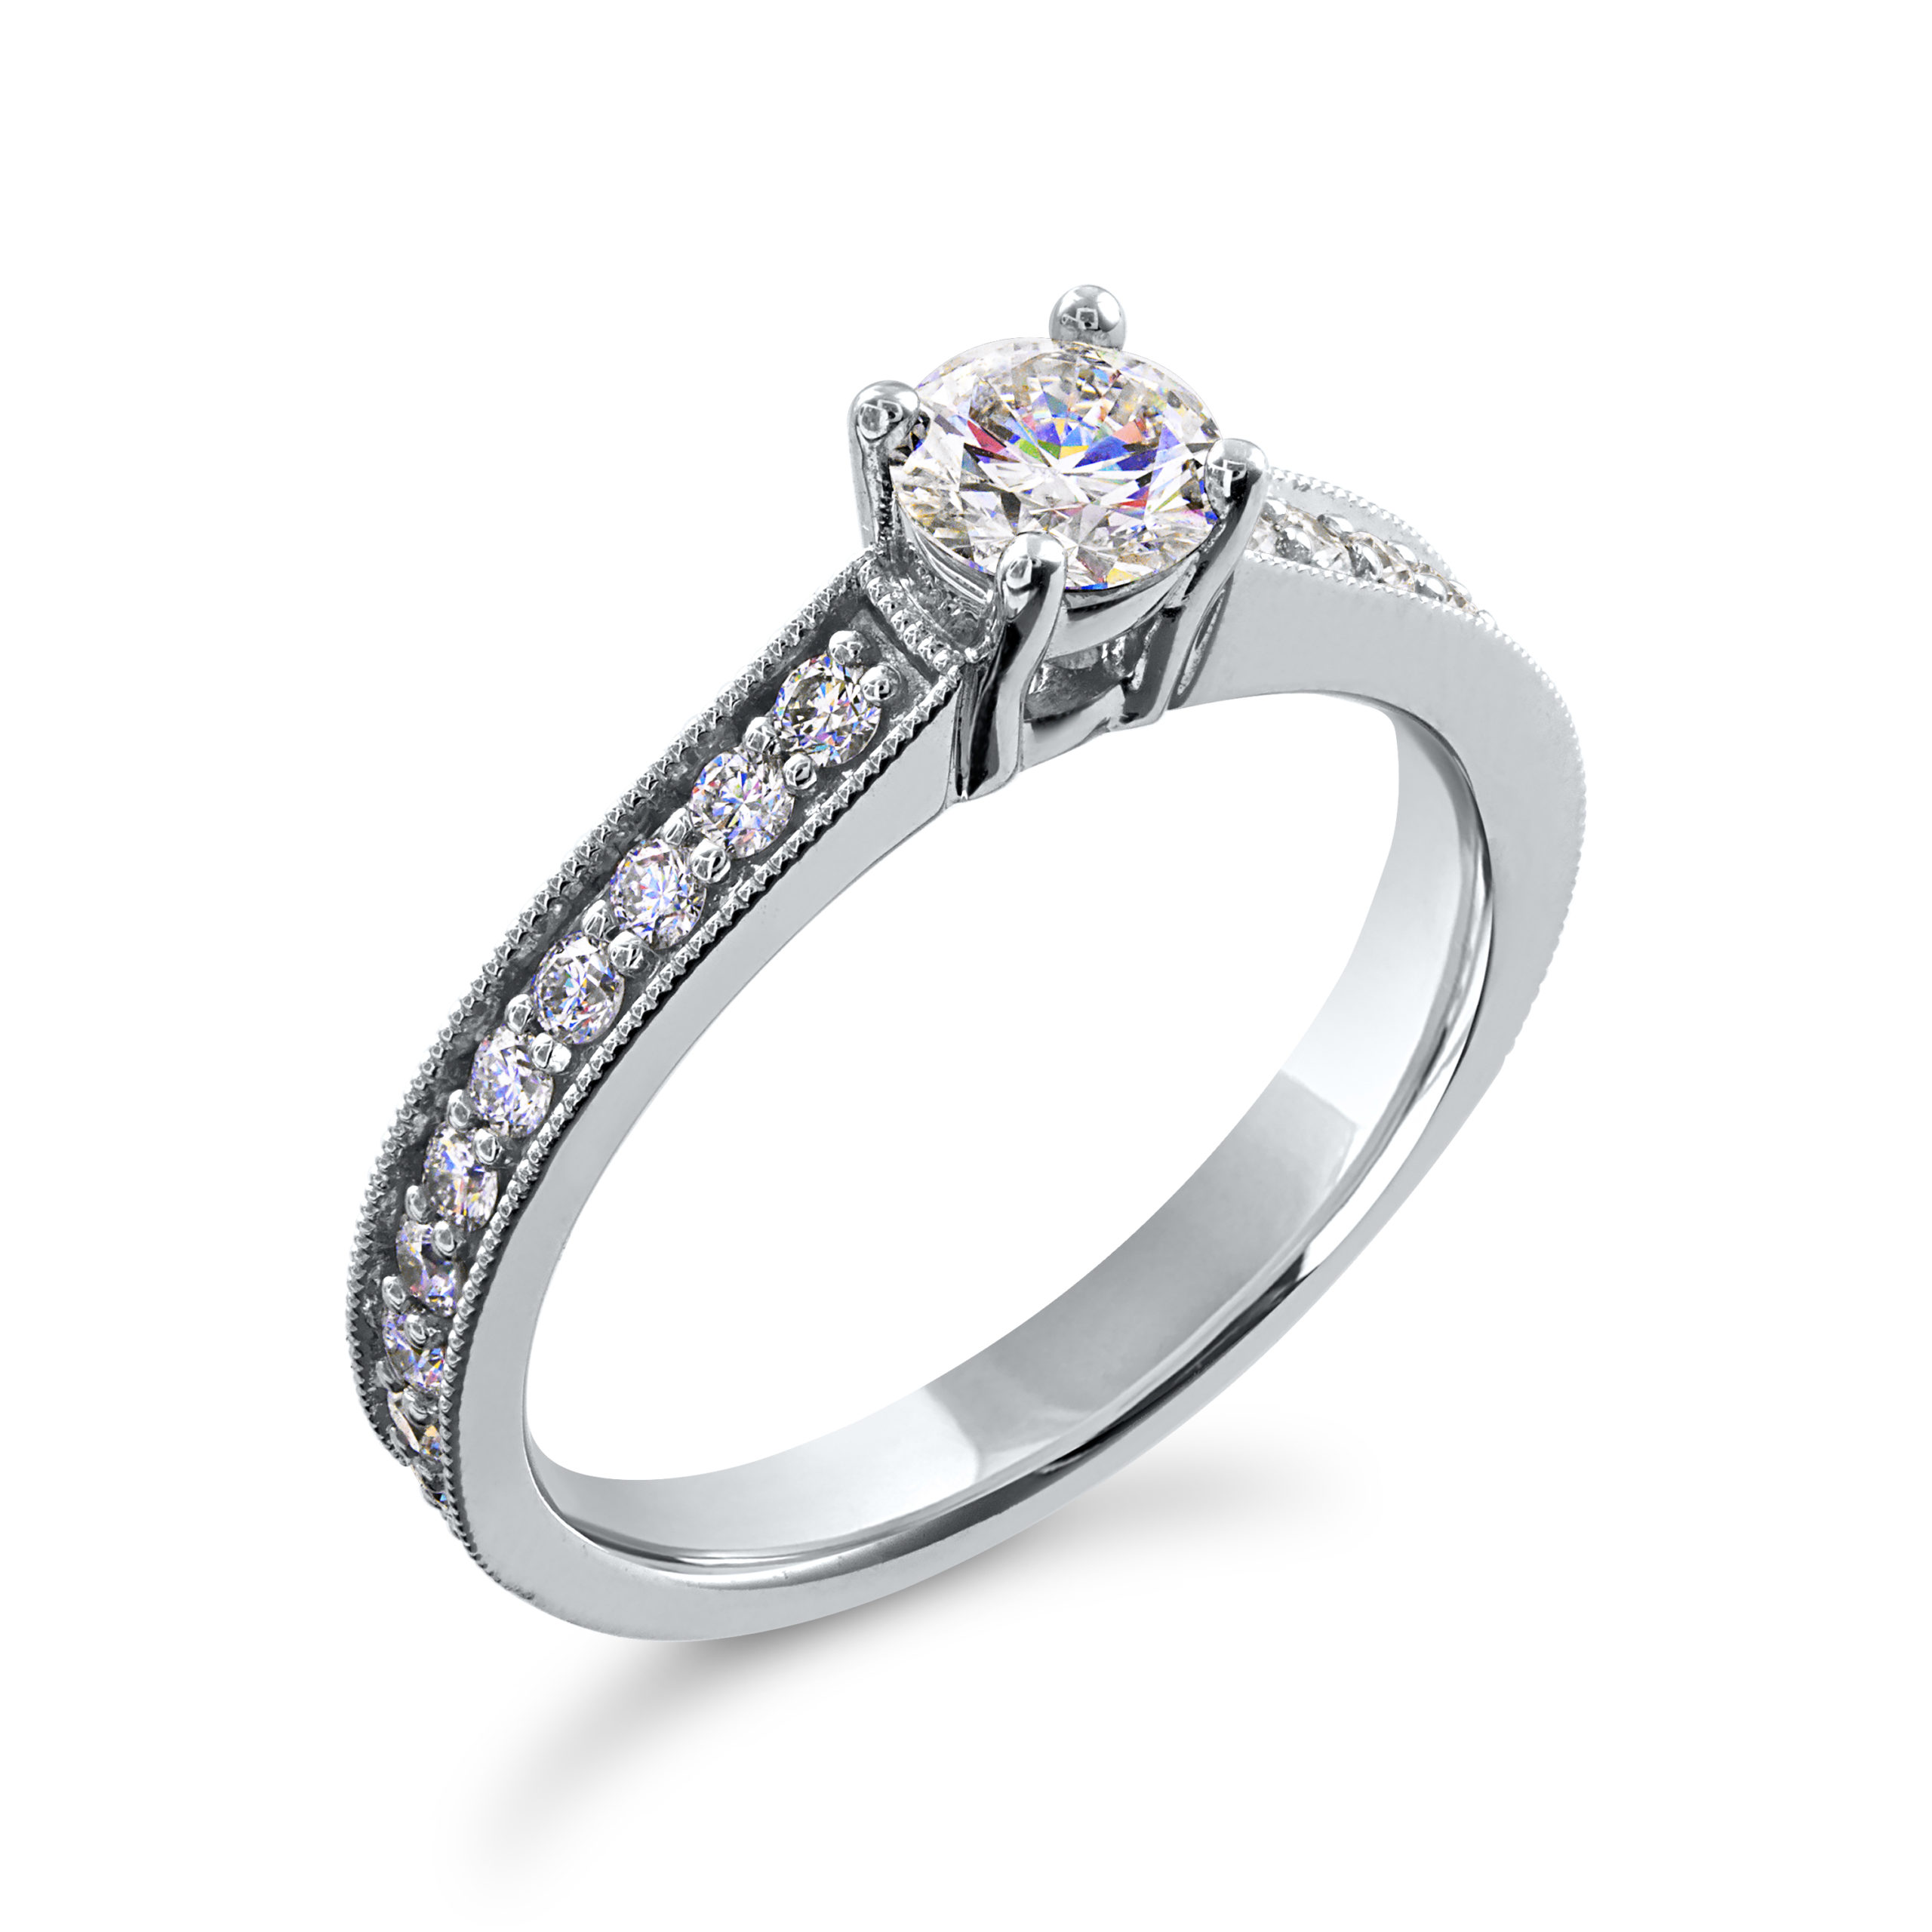 Facets of Fire Diamond Engagement Ring